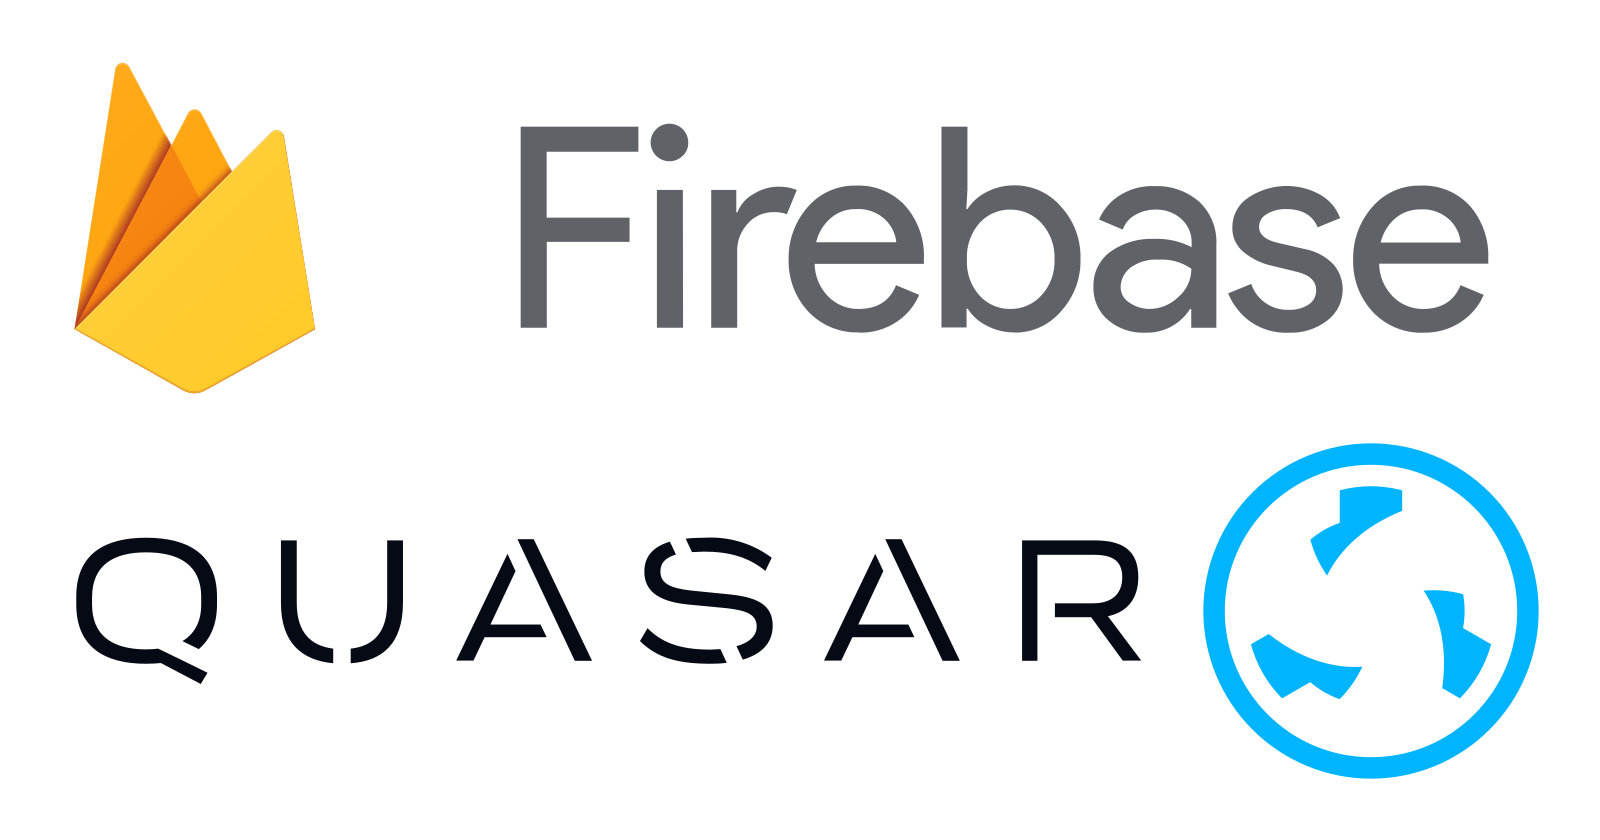 Implementing Firebase in Quasar: A Step-by-Step Guide